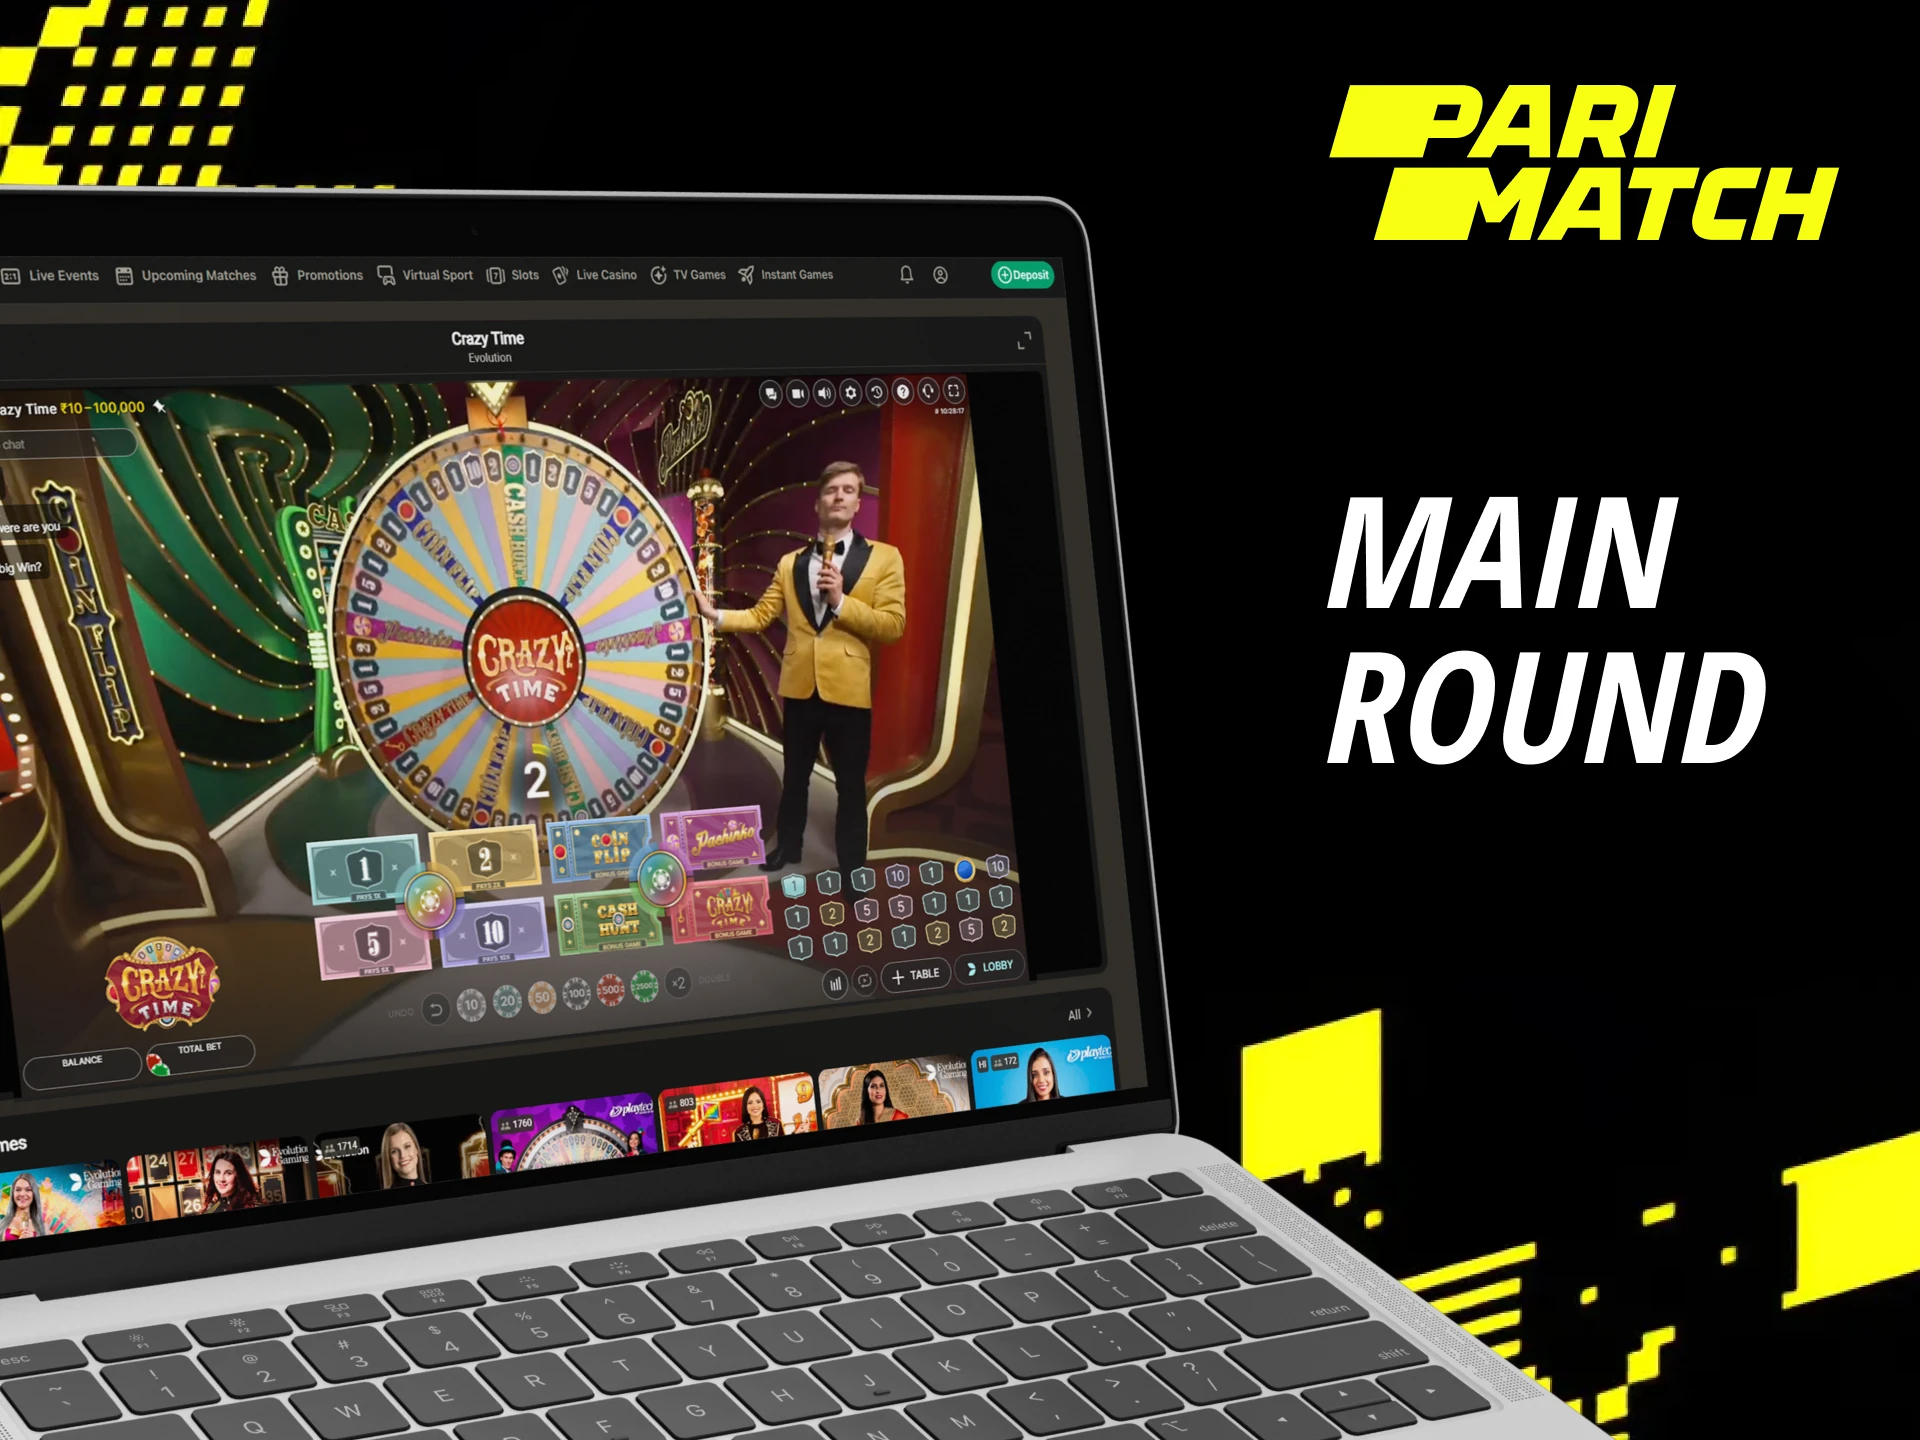 In the main round of Parimatch Crazy Time you can increase your bet.